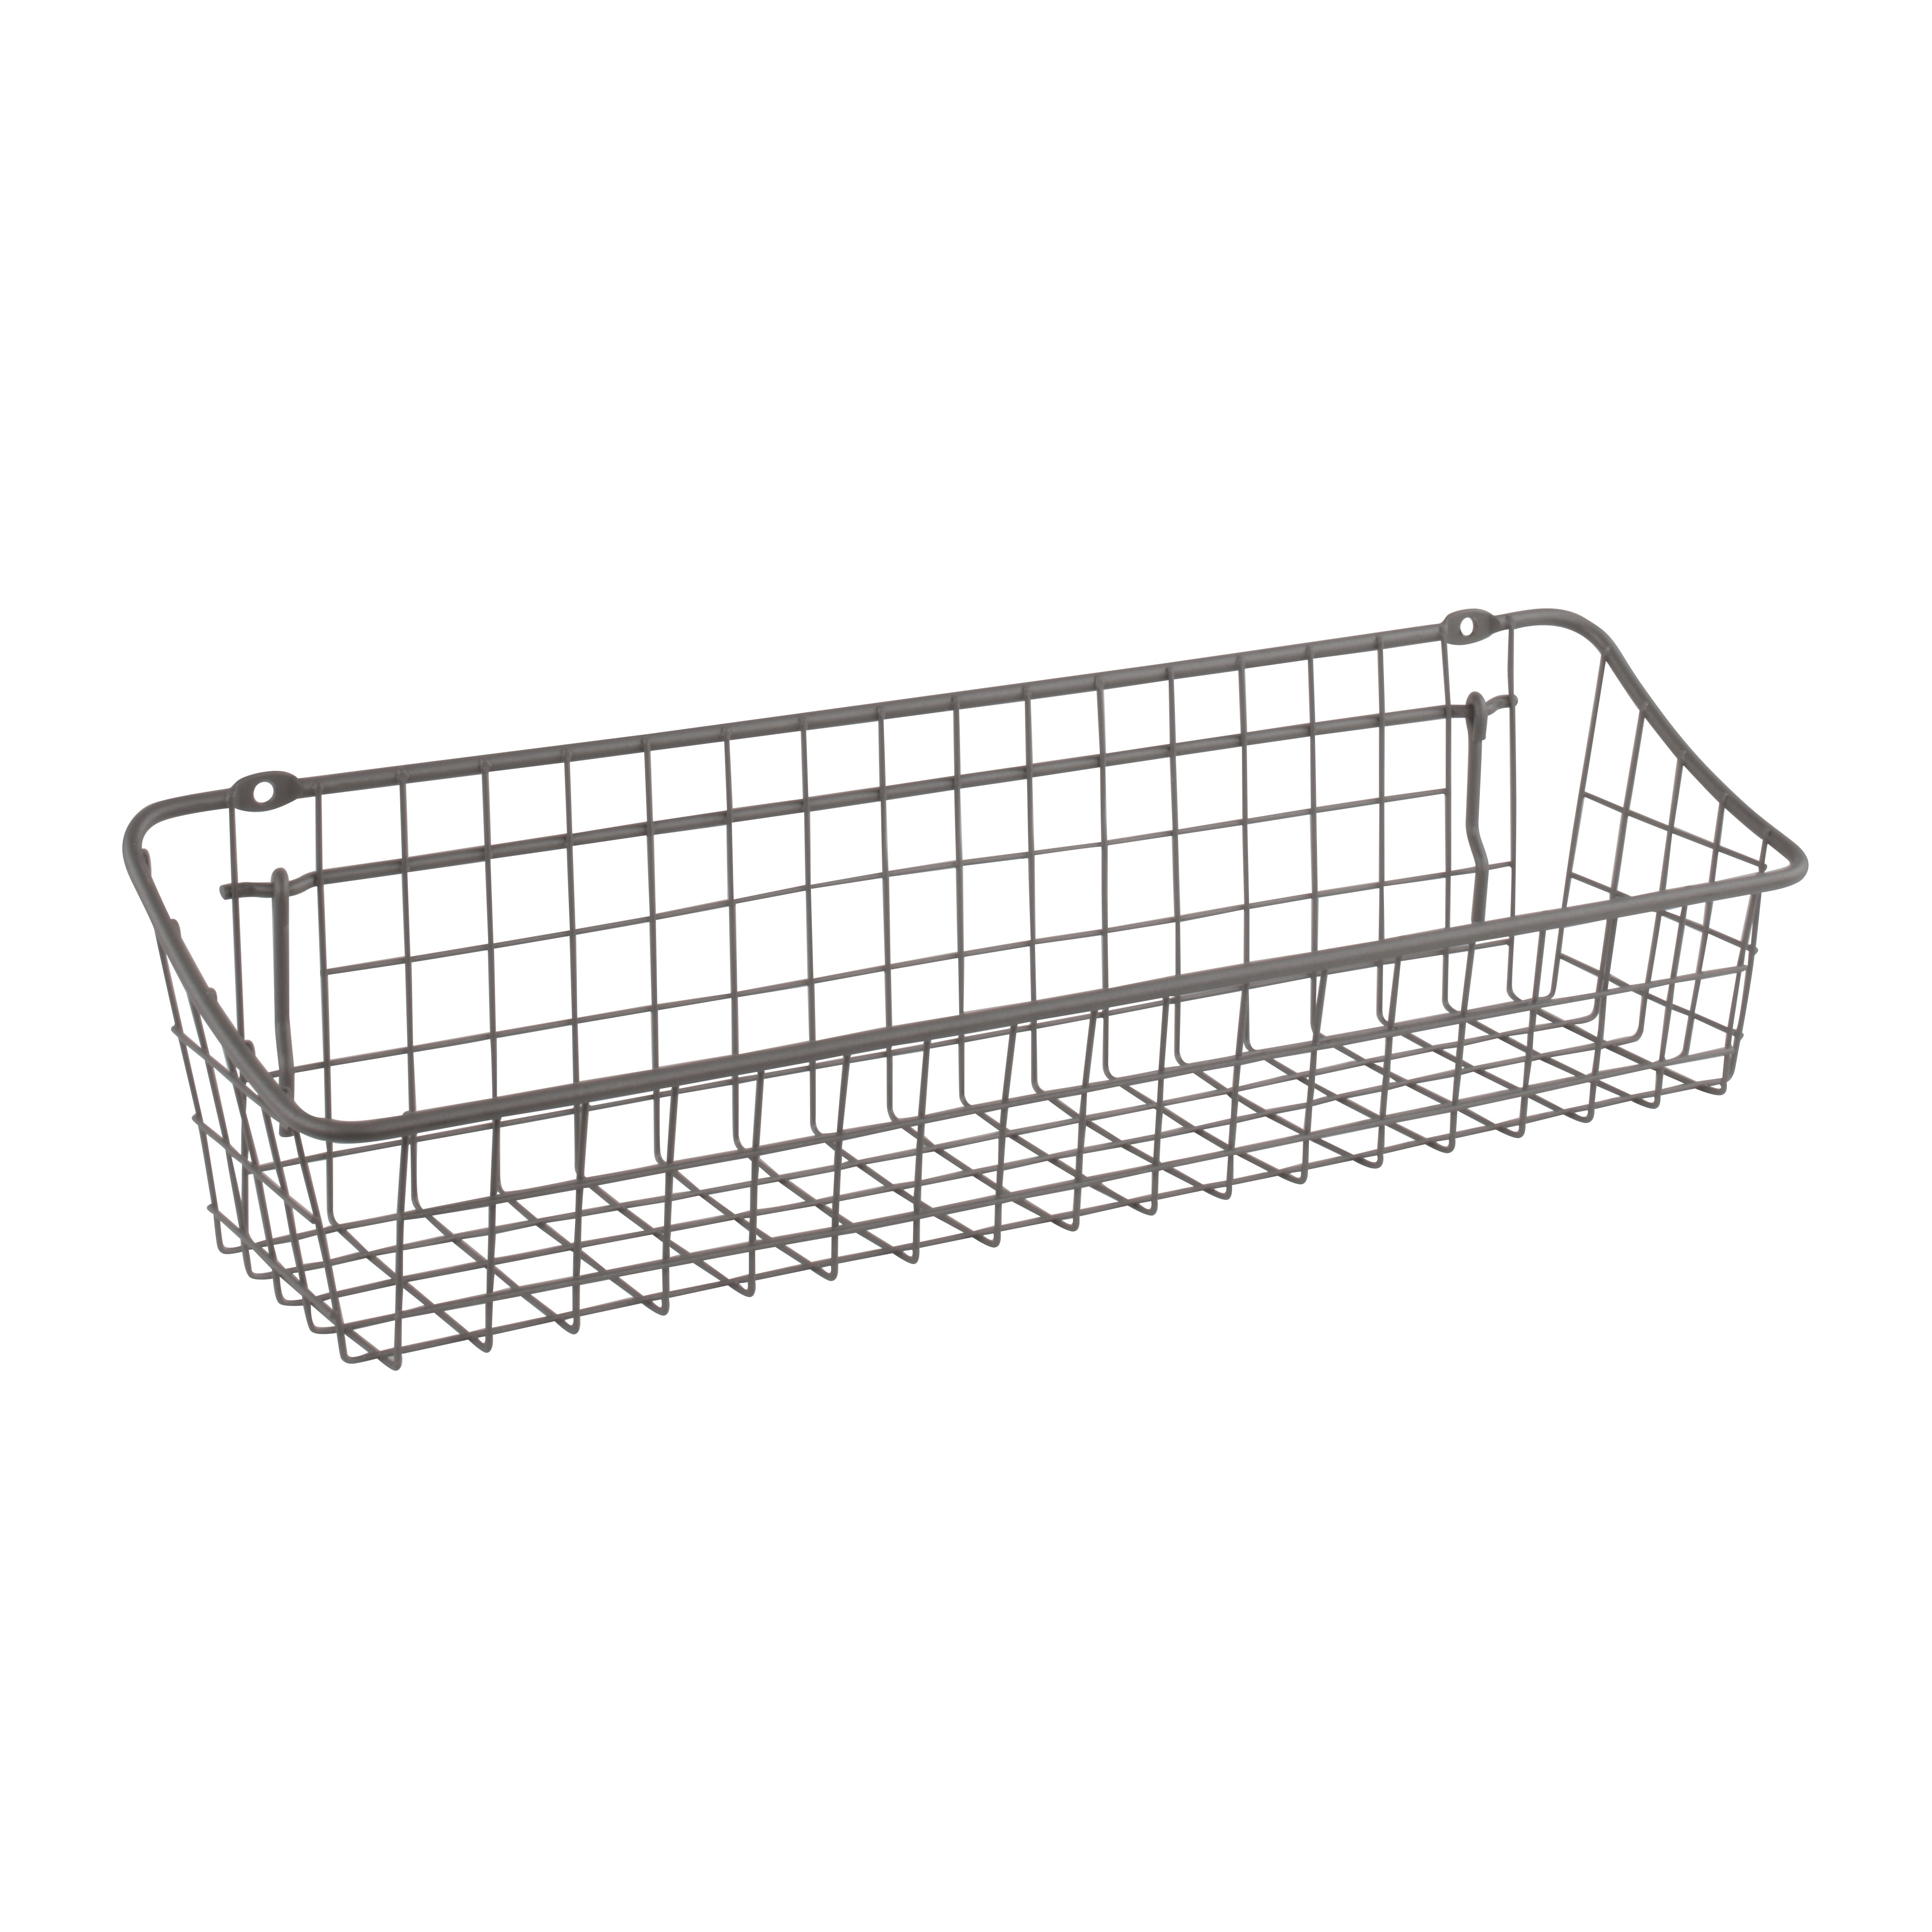 Details about   Large Spectrum Diversified Pegboard Wall Mount Basket Industrial Gray 